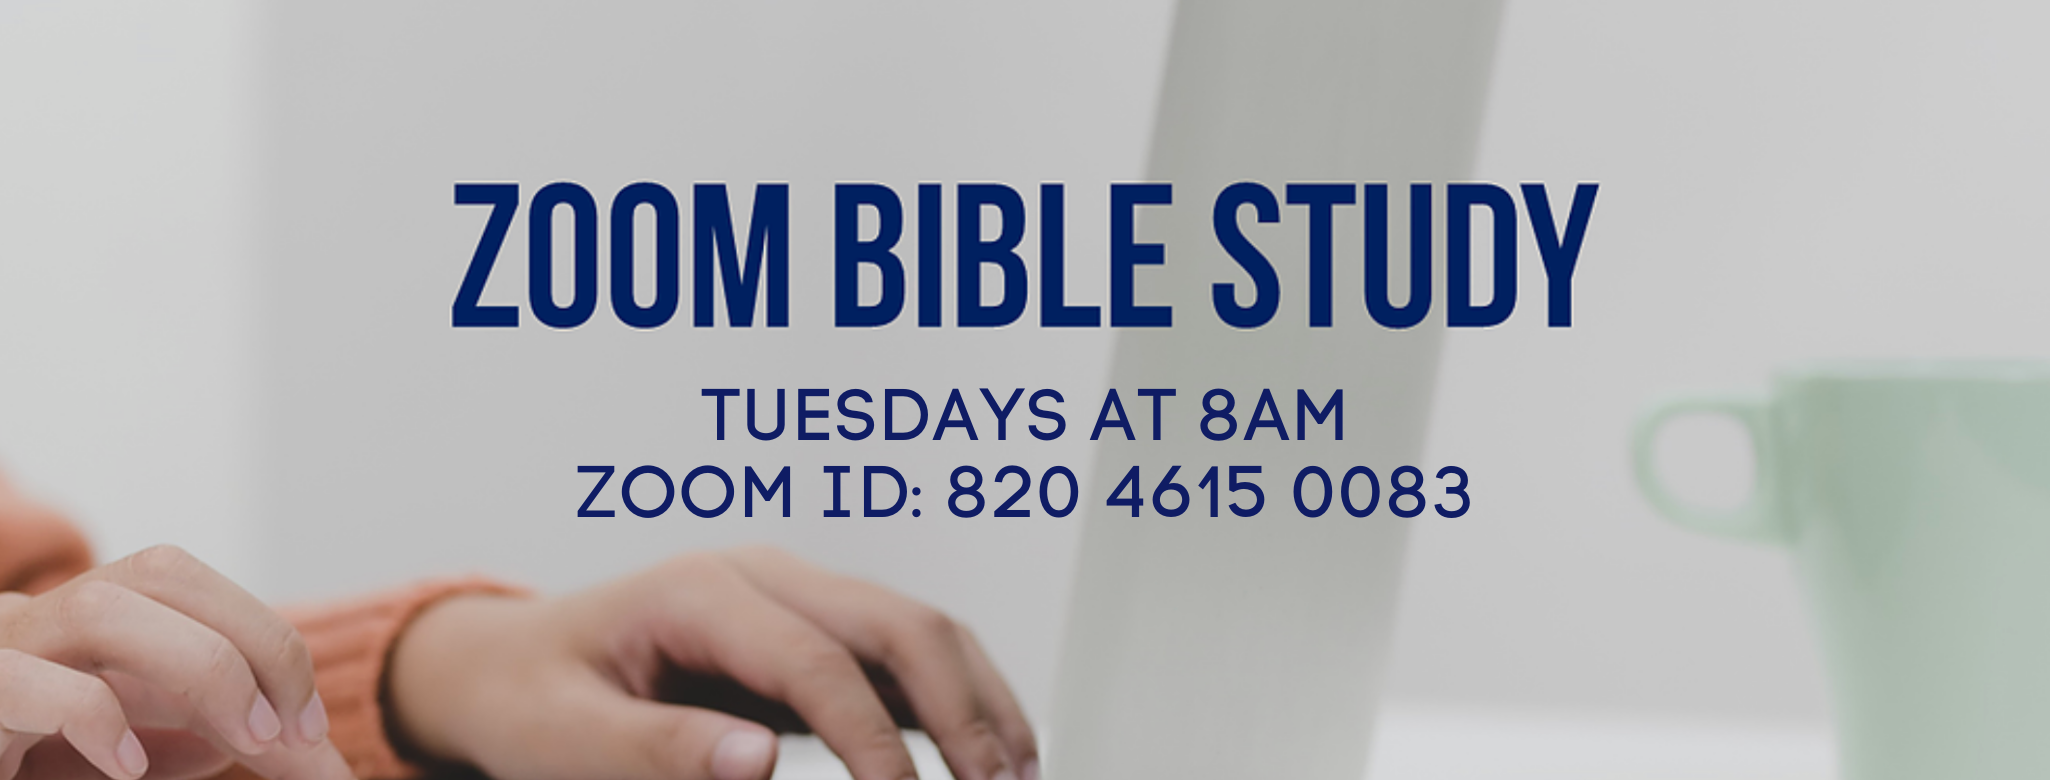 Zoom Bible Study Tuesday at 8AM zoom id 820 4615 0083